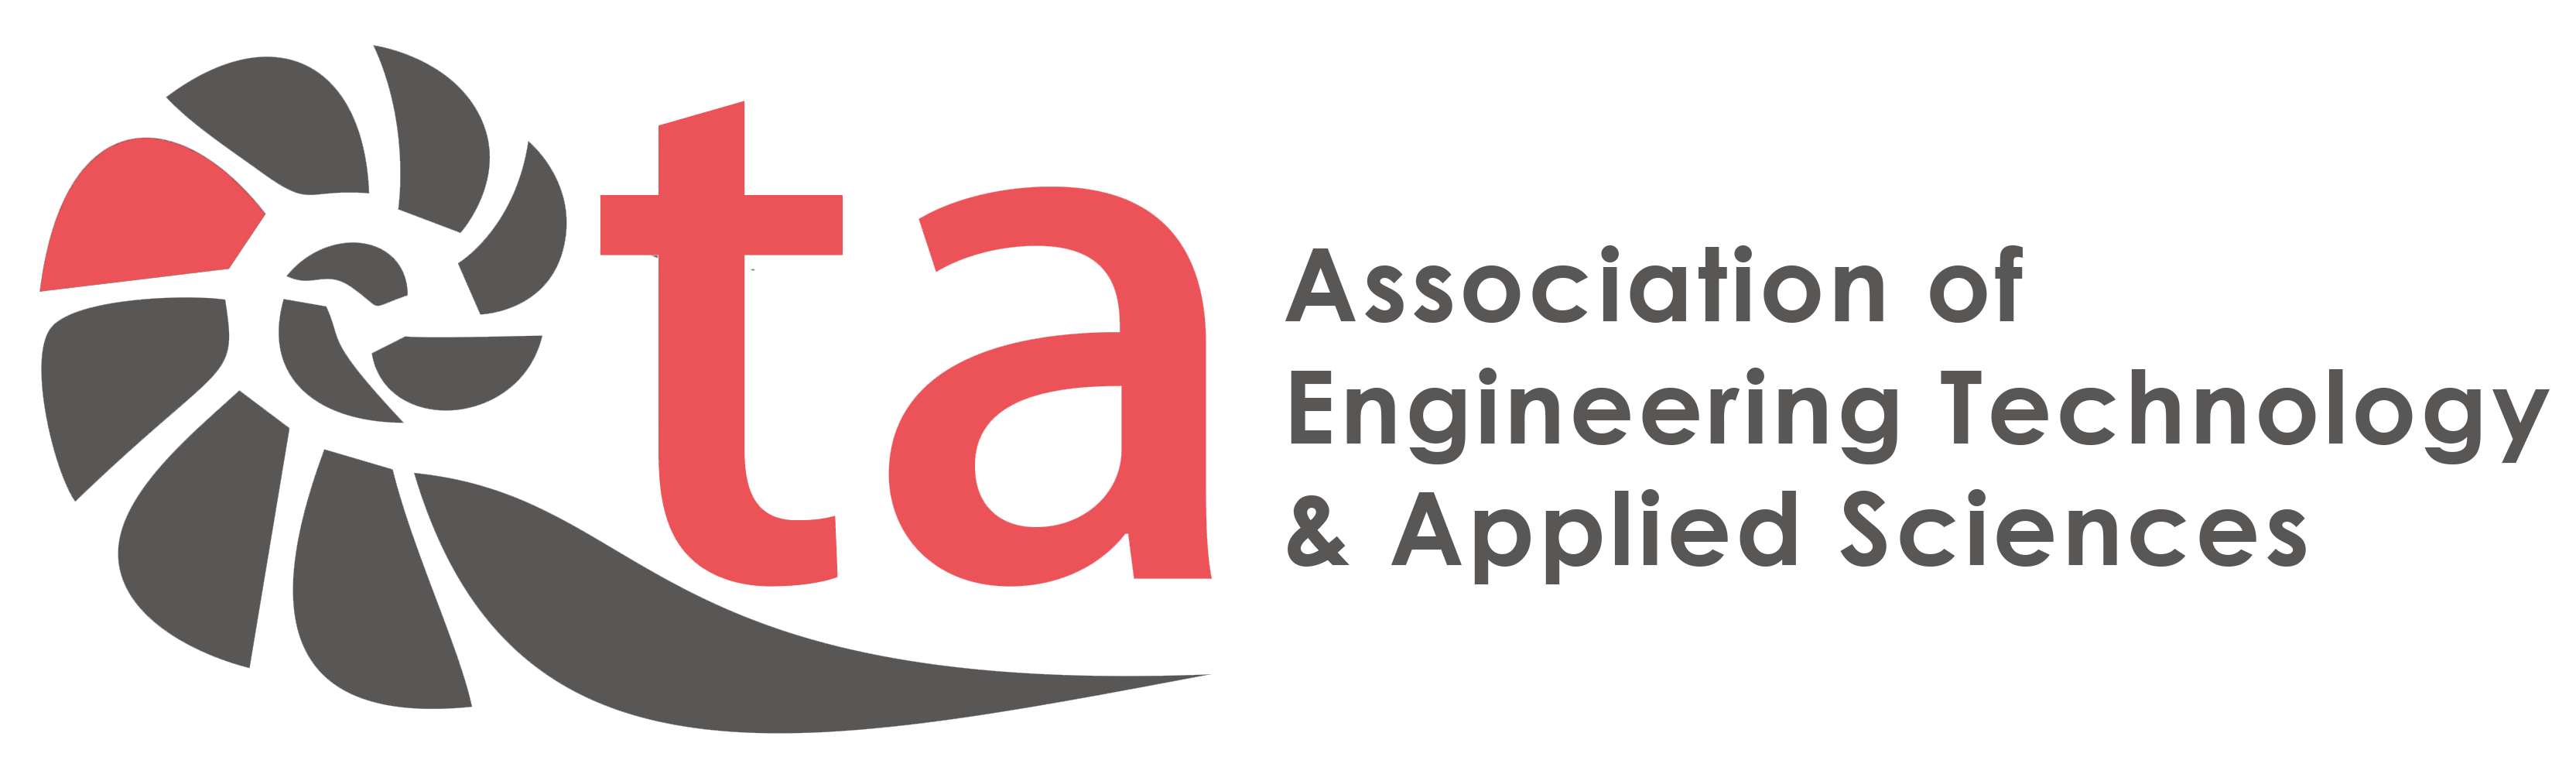 AETA International Conference on Futuristic Trends in Engineering, Applied Science, and Information Technology in Digital Era  (FEAT)